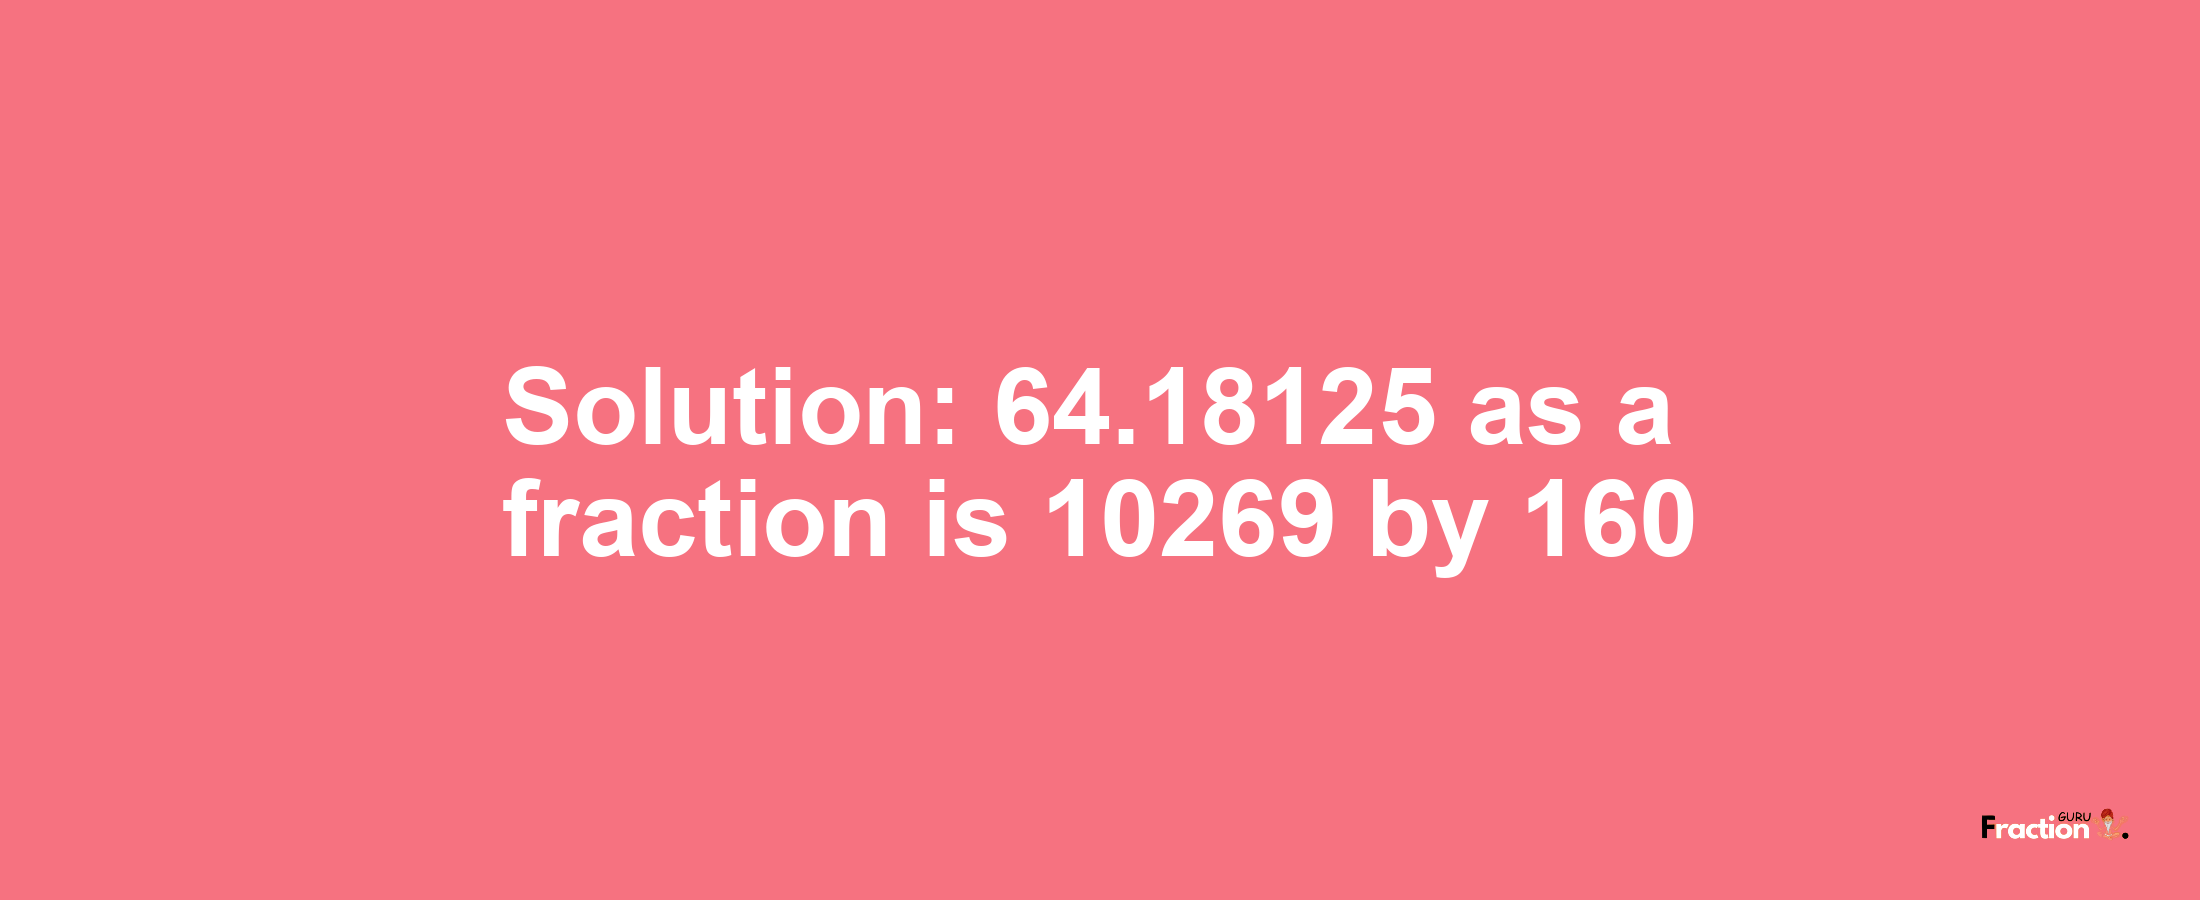 Solution:64.18125 as a fraction is 10269/160